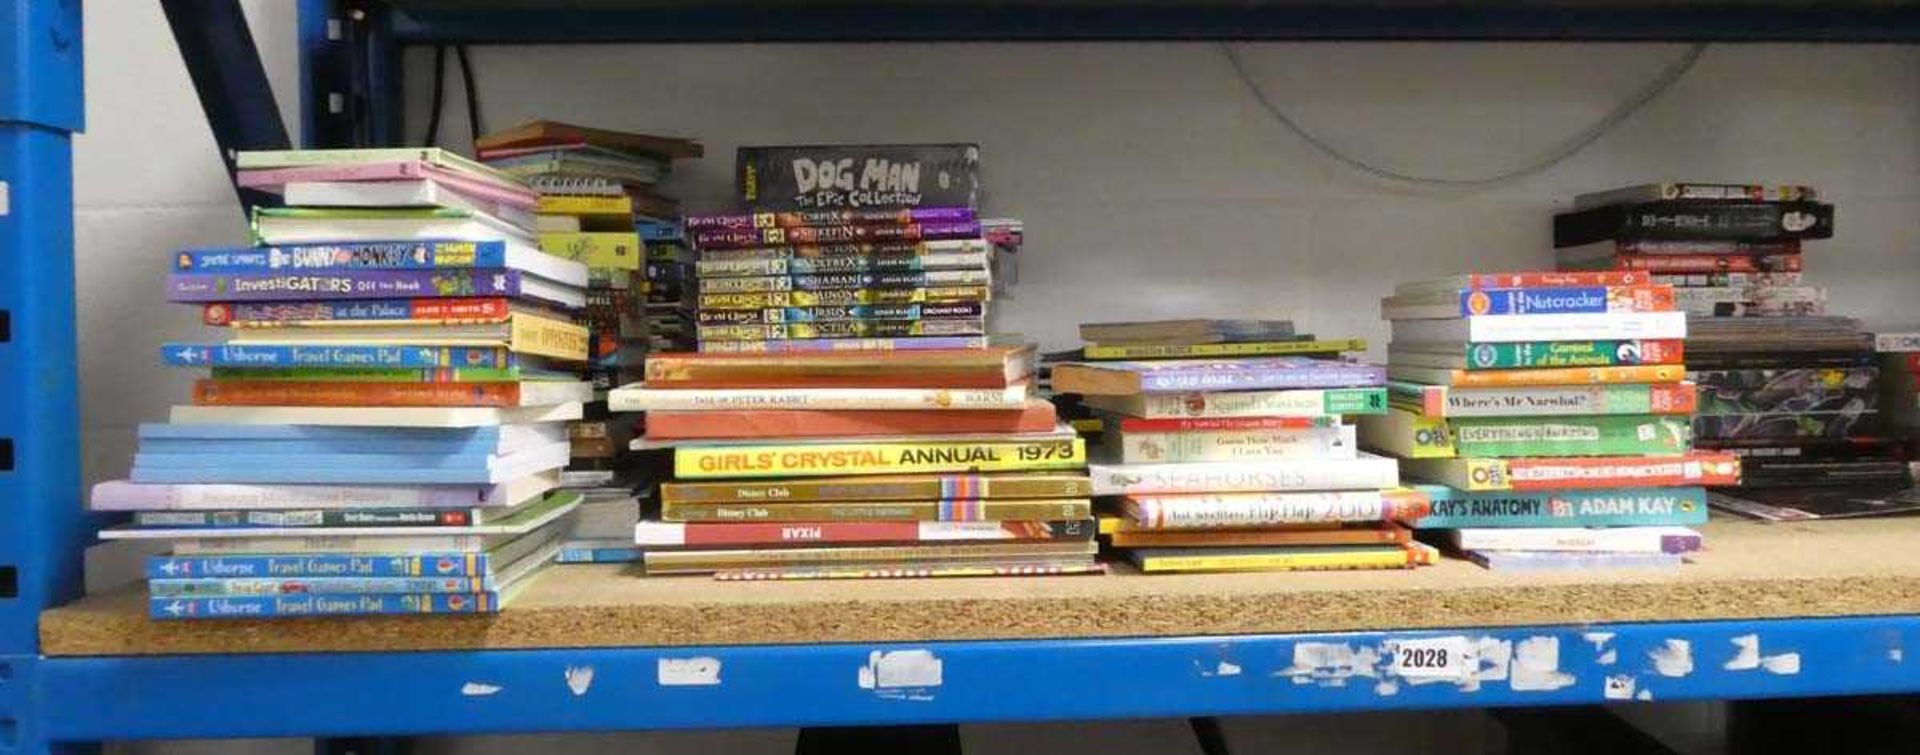 Selection of childrens books, puzzles books, annuals and graphic novels